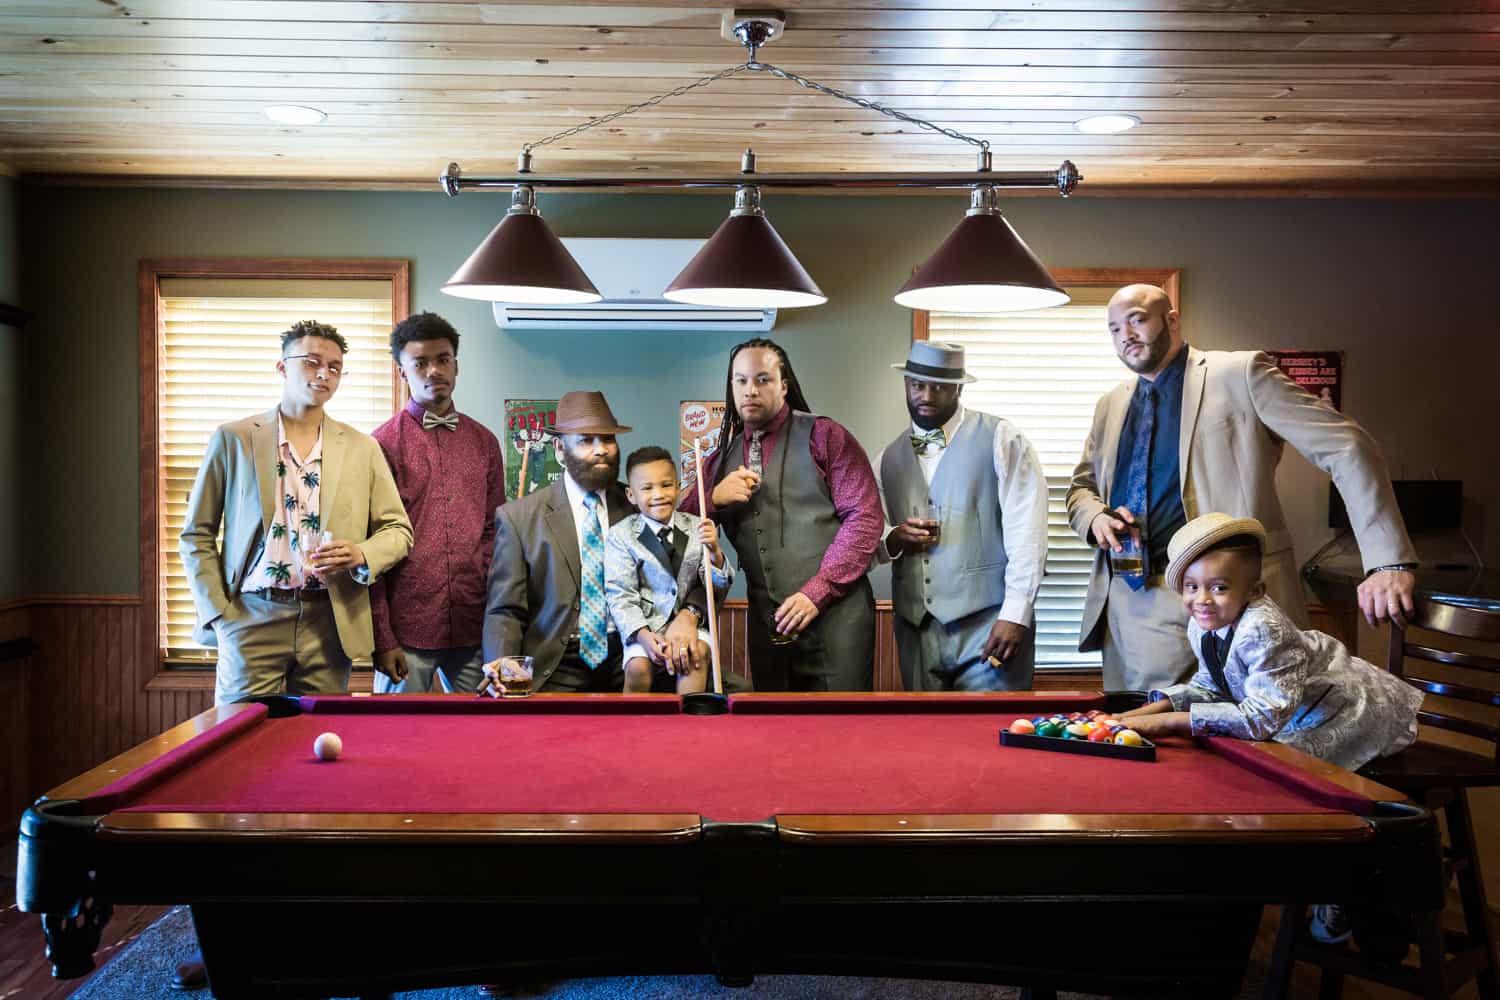 Male family members behind a pool table during a family reunion portrait